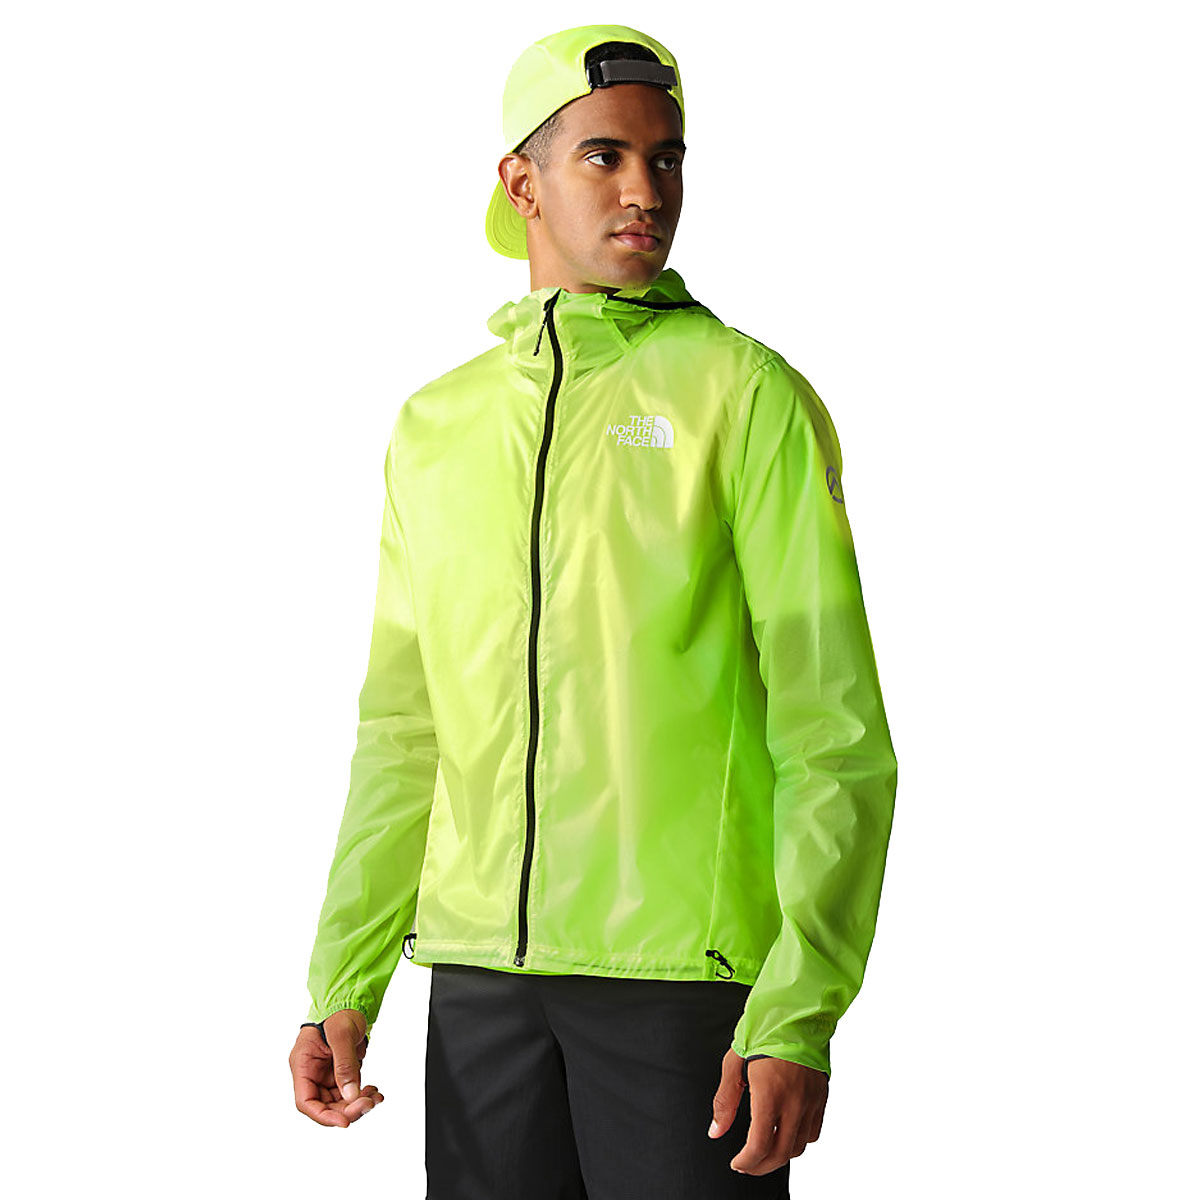 THE NORTH FACE - SUMMIT SUPERIOR